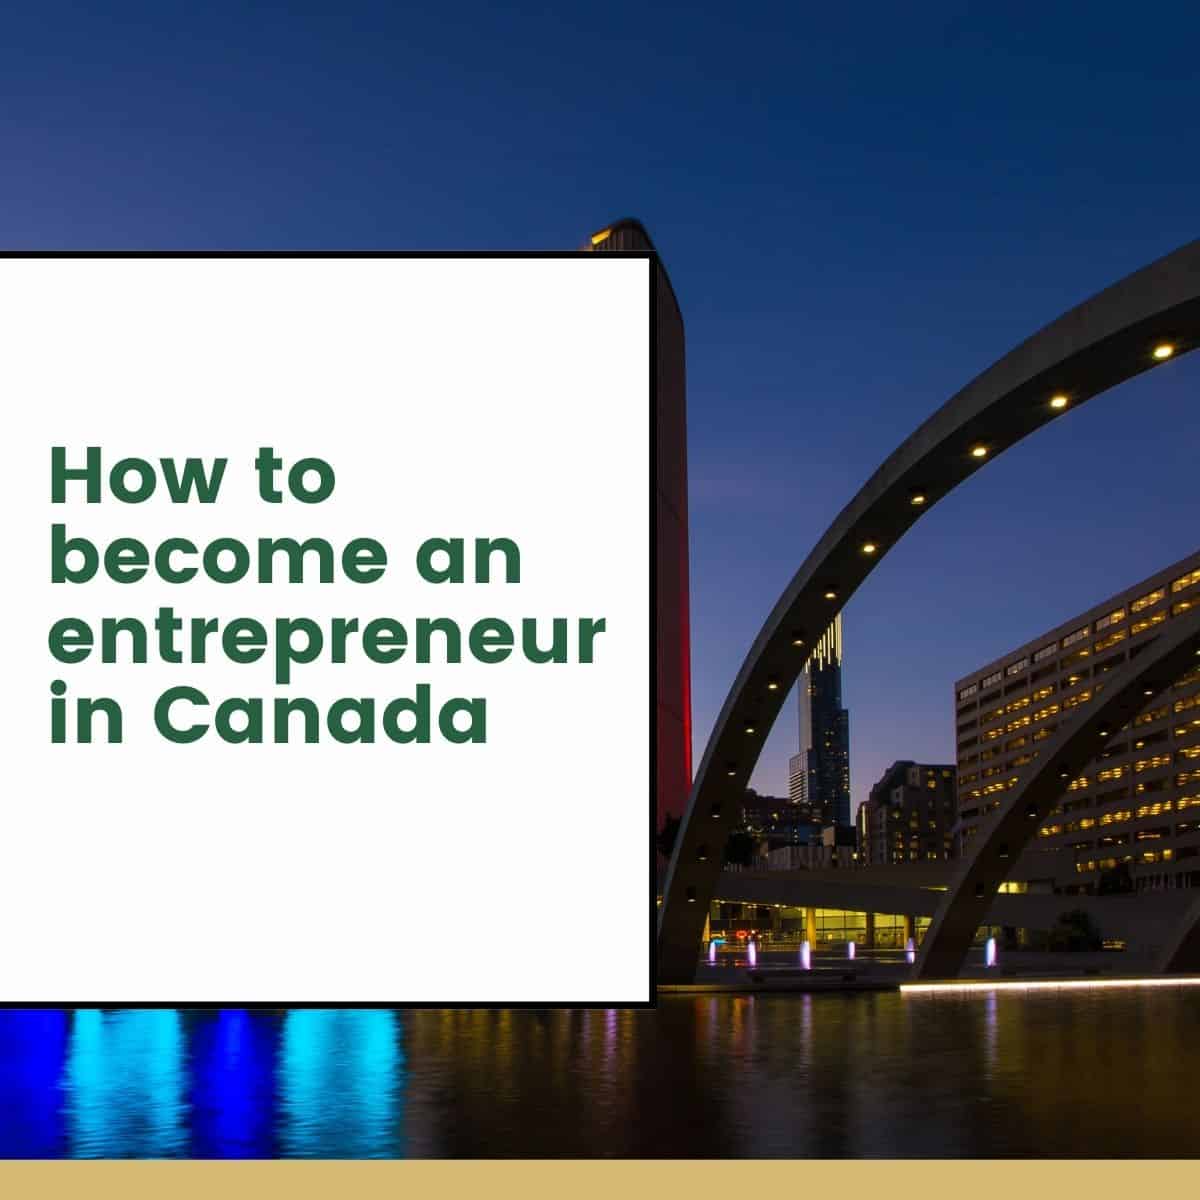 How to become an entrepreneur in Canada